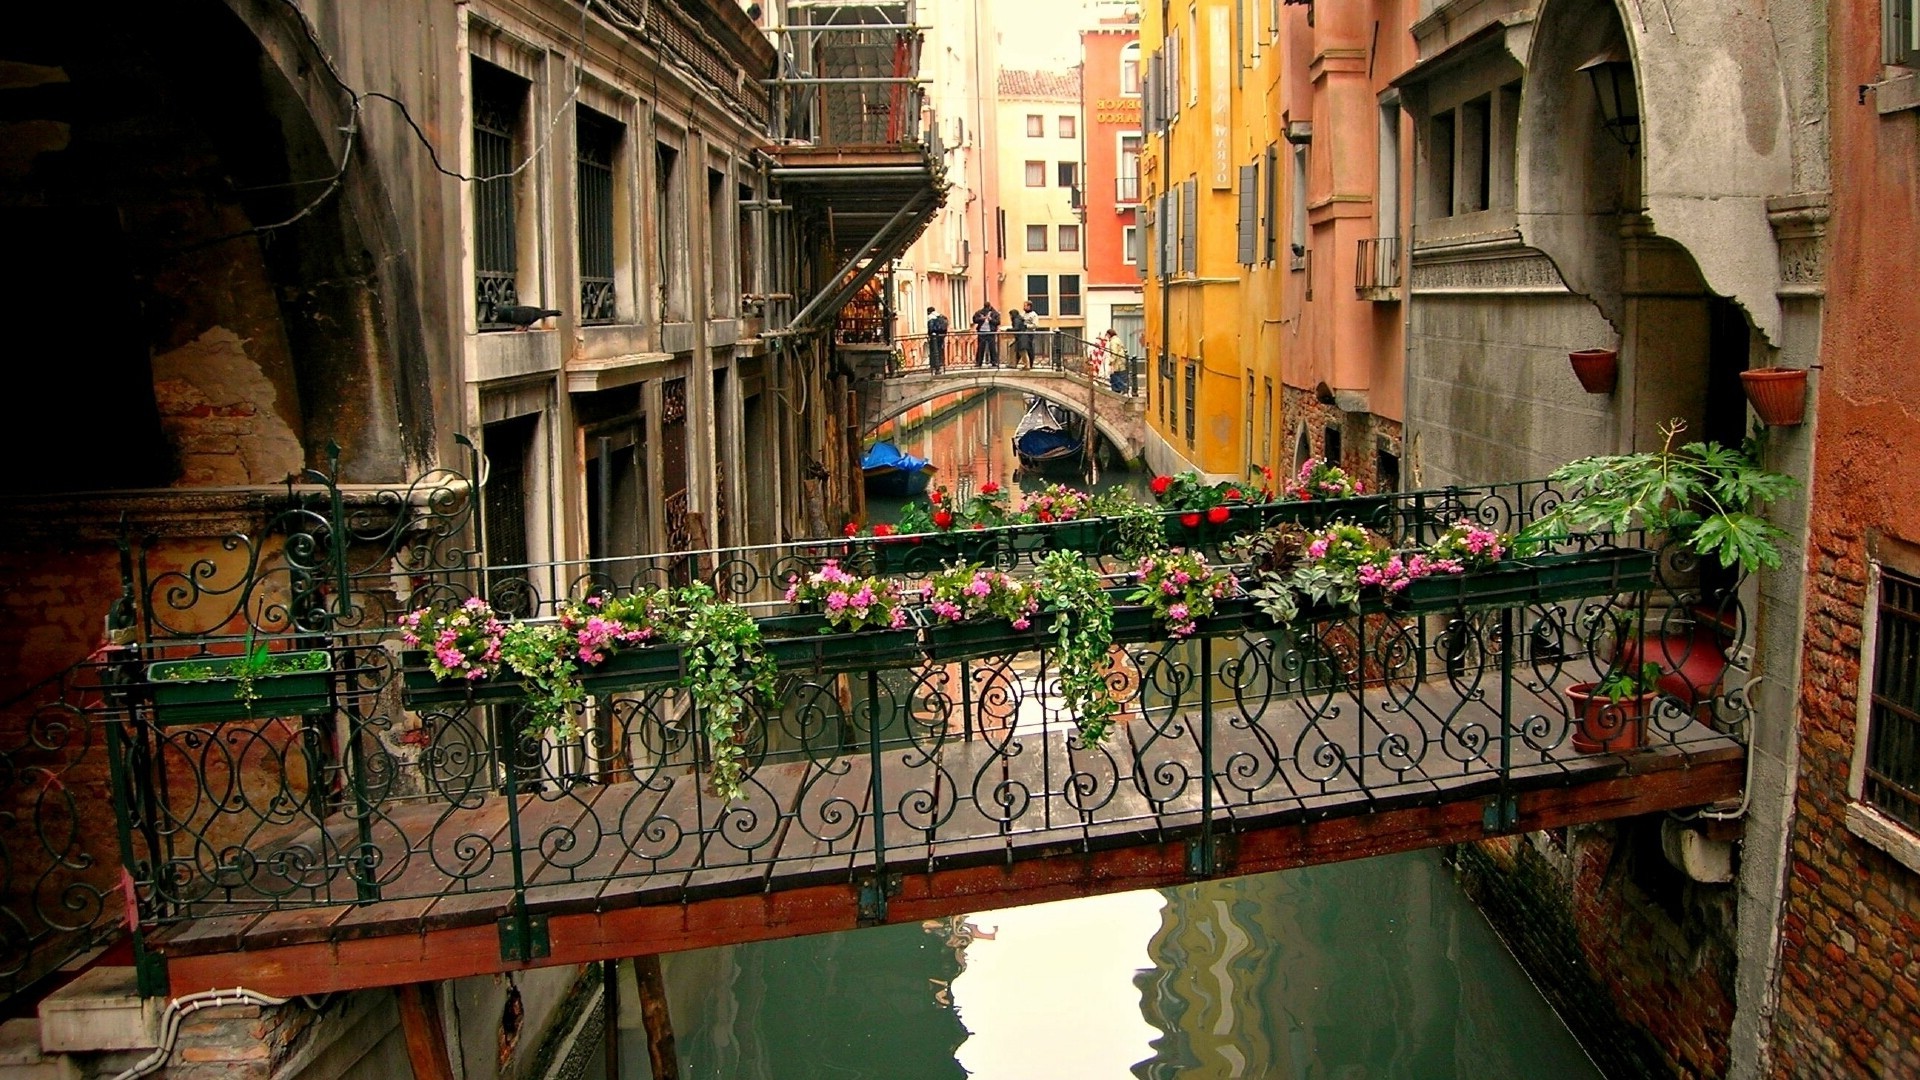 cityscape, Architecture, Town, Building, Venice, Italy, Water, Bridge, House, Window, Flowers, Boat, Reflection, Canal Wallpaper